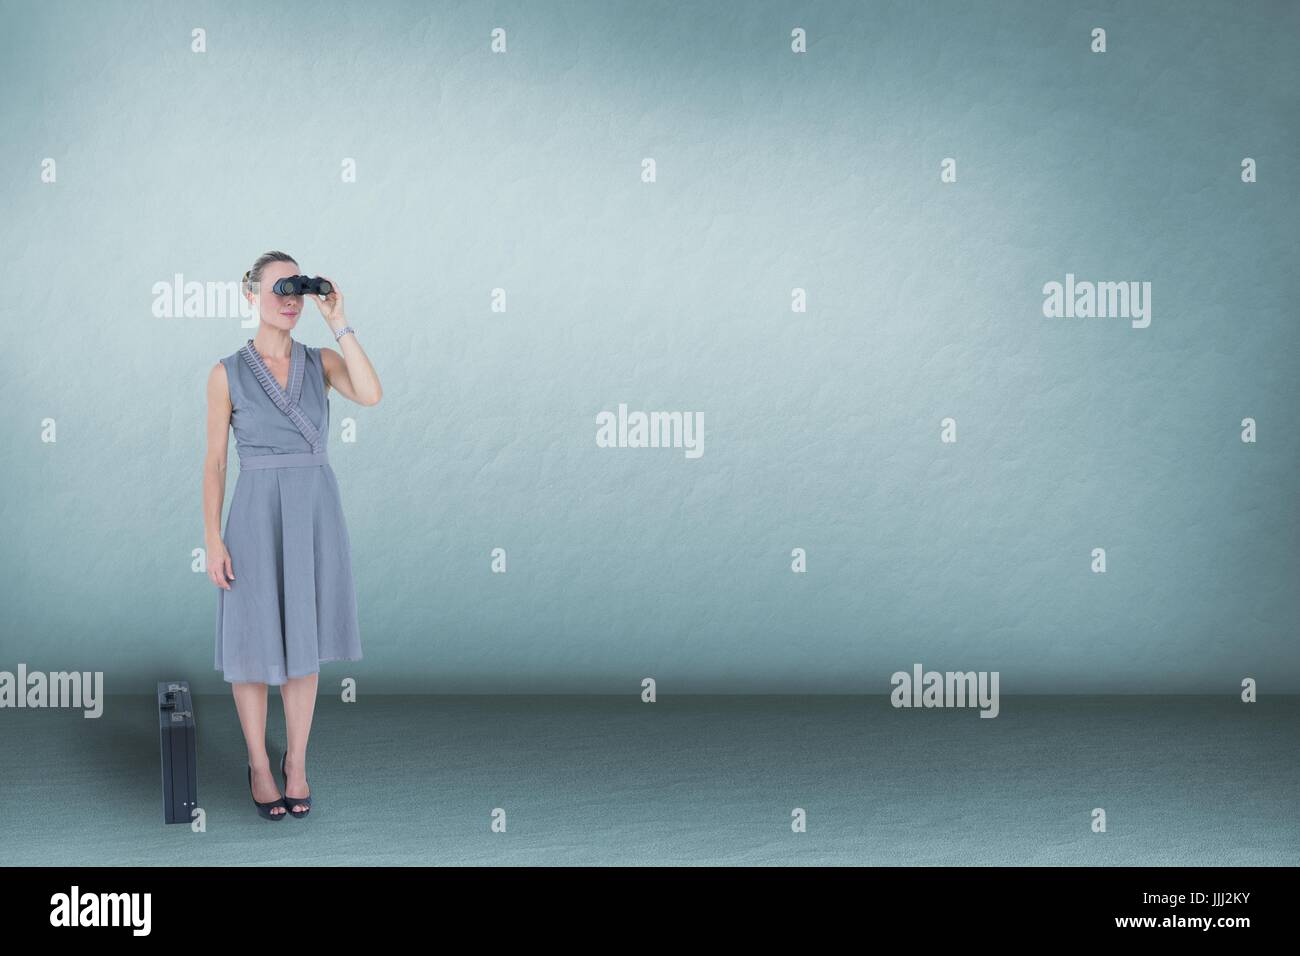 Woman looking through binoculars against blue background and copy space Stock Photo